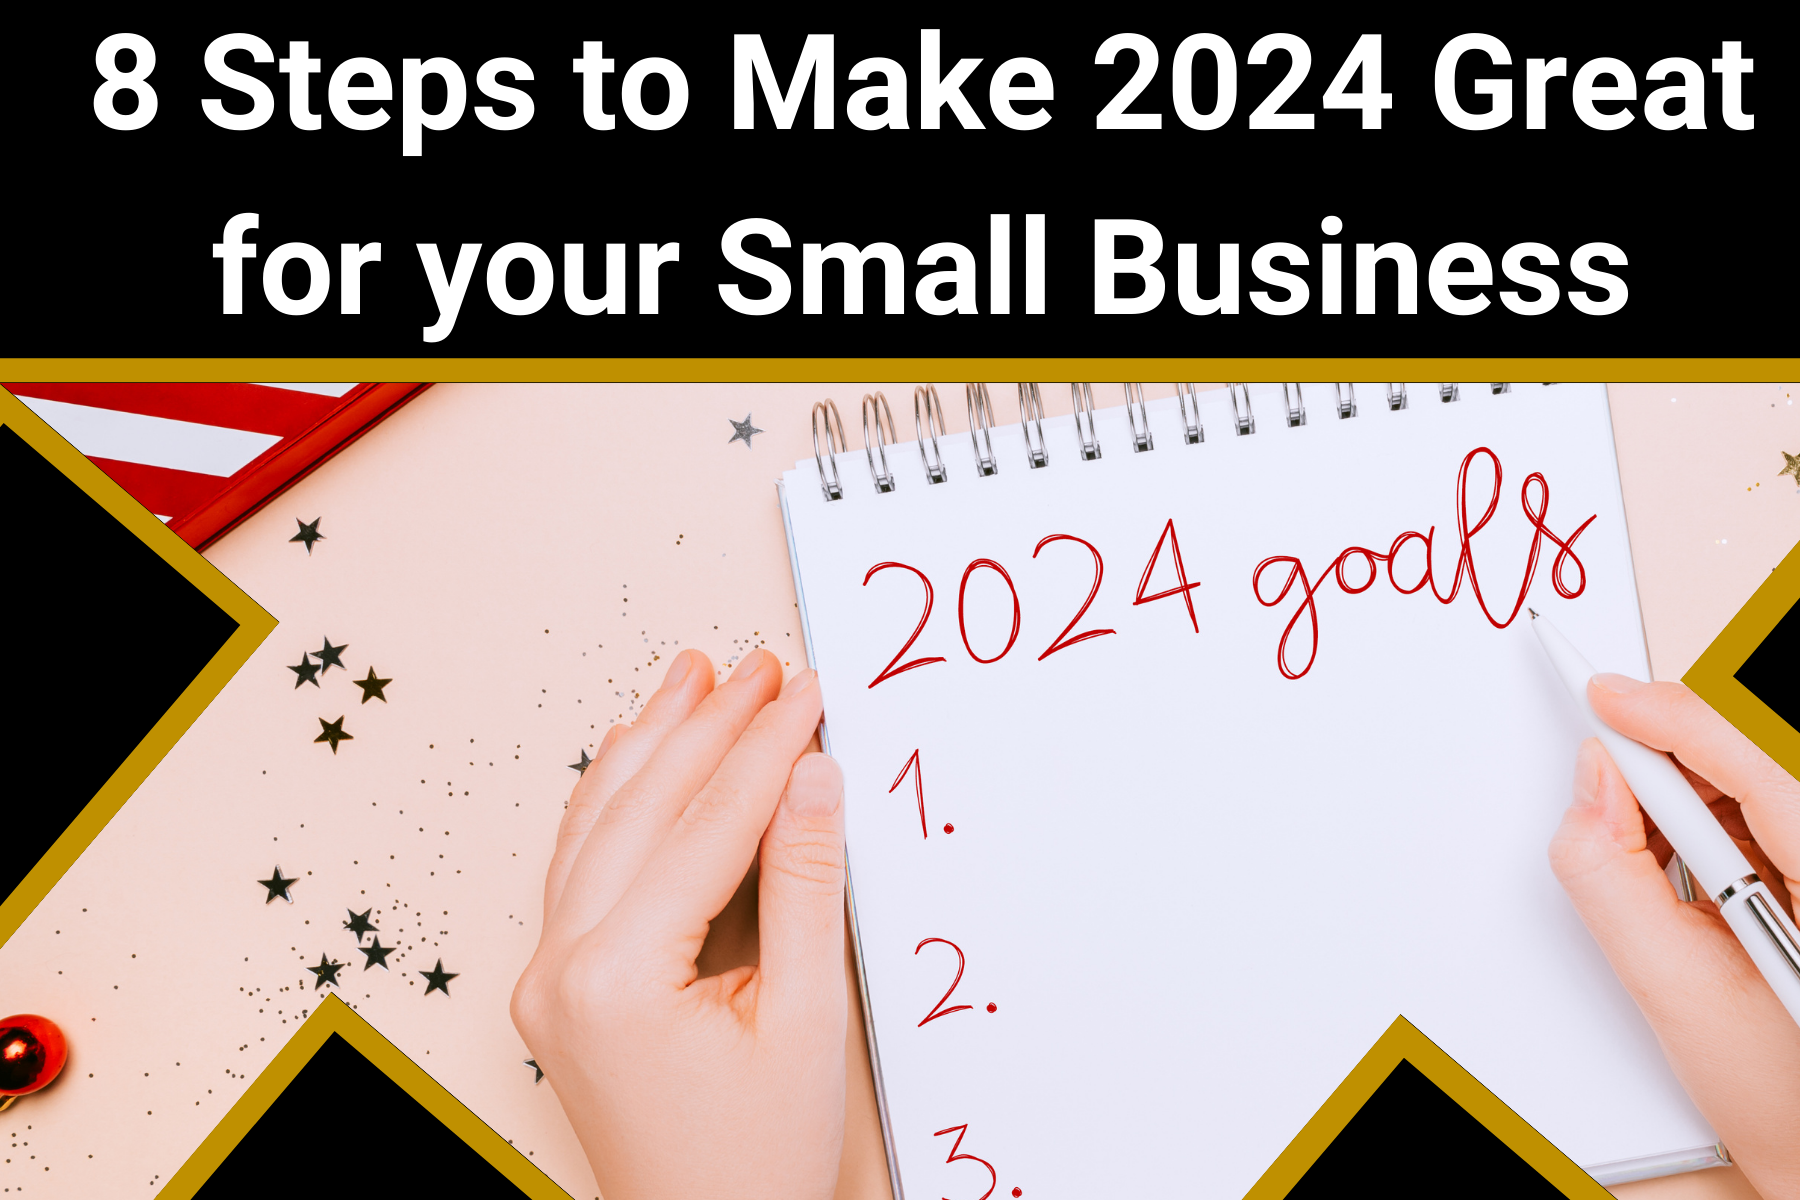 8 Steps to Make 2024 Great for Your Small Business